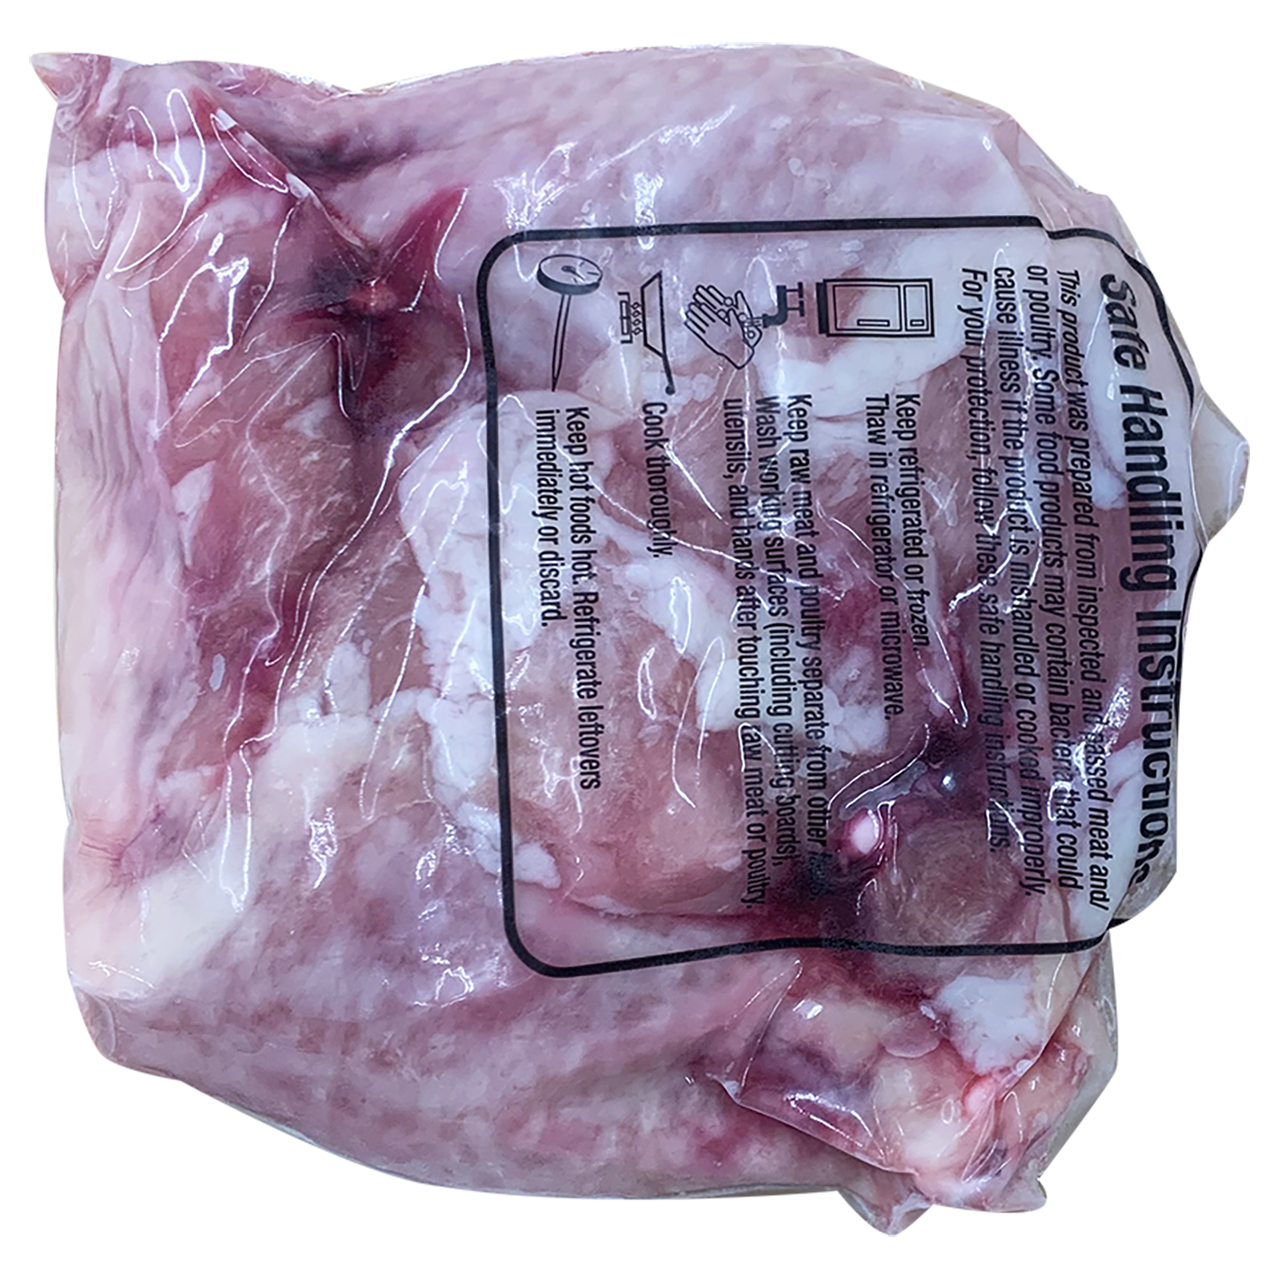 The back of a package of chicken legs from Waseda Farms.